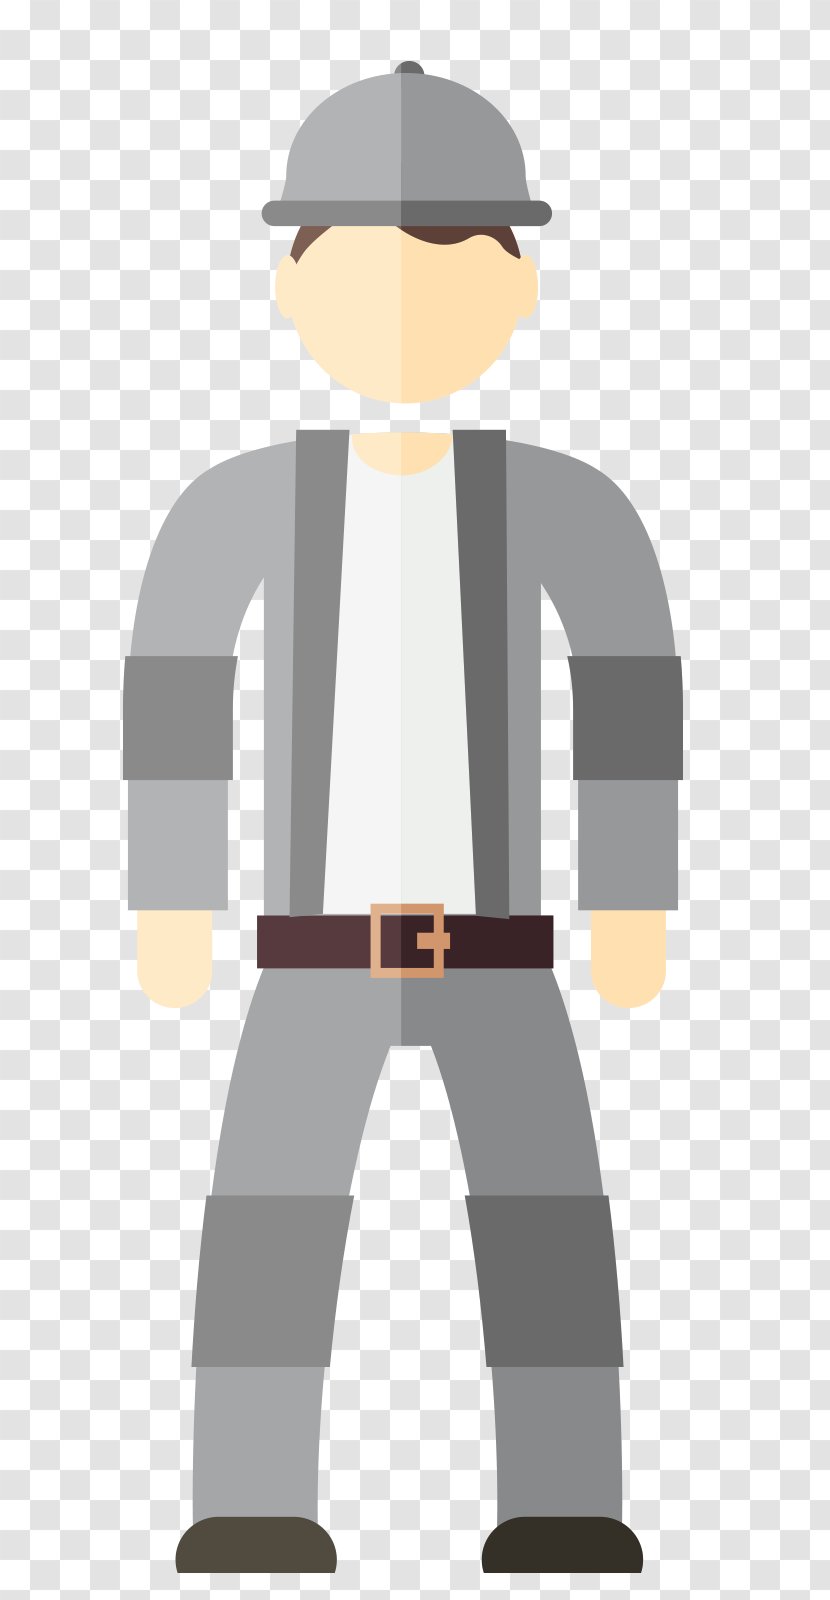 Adobe Illustrator - Male - The Man In Hat Transparent PNG